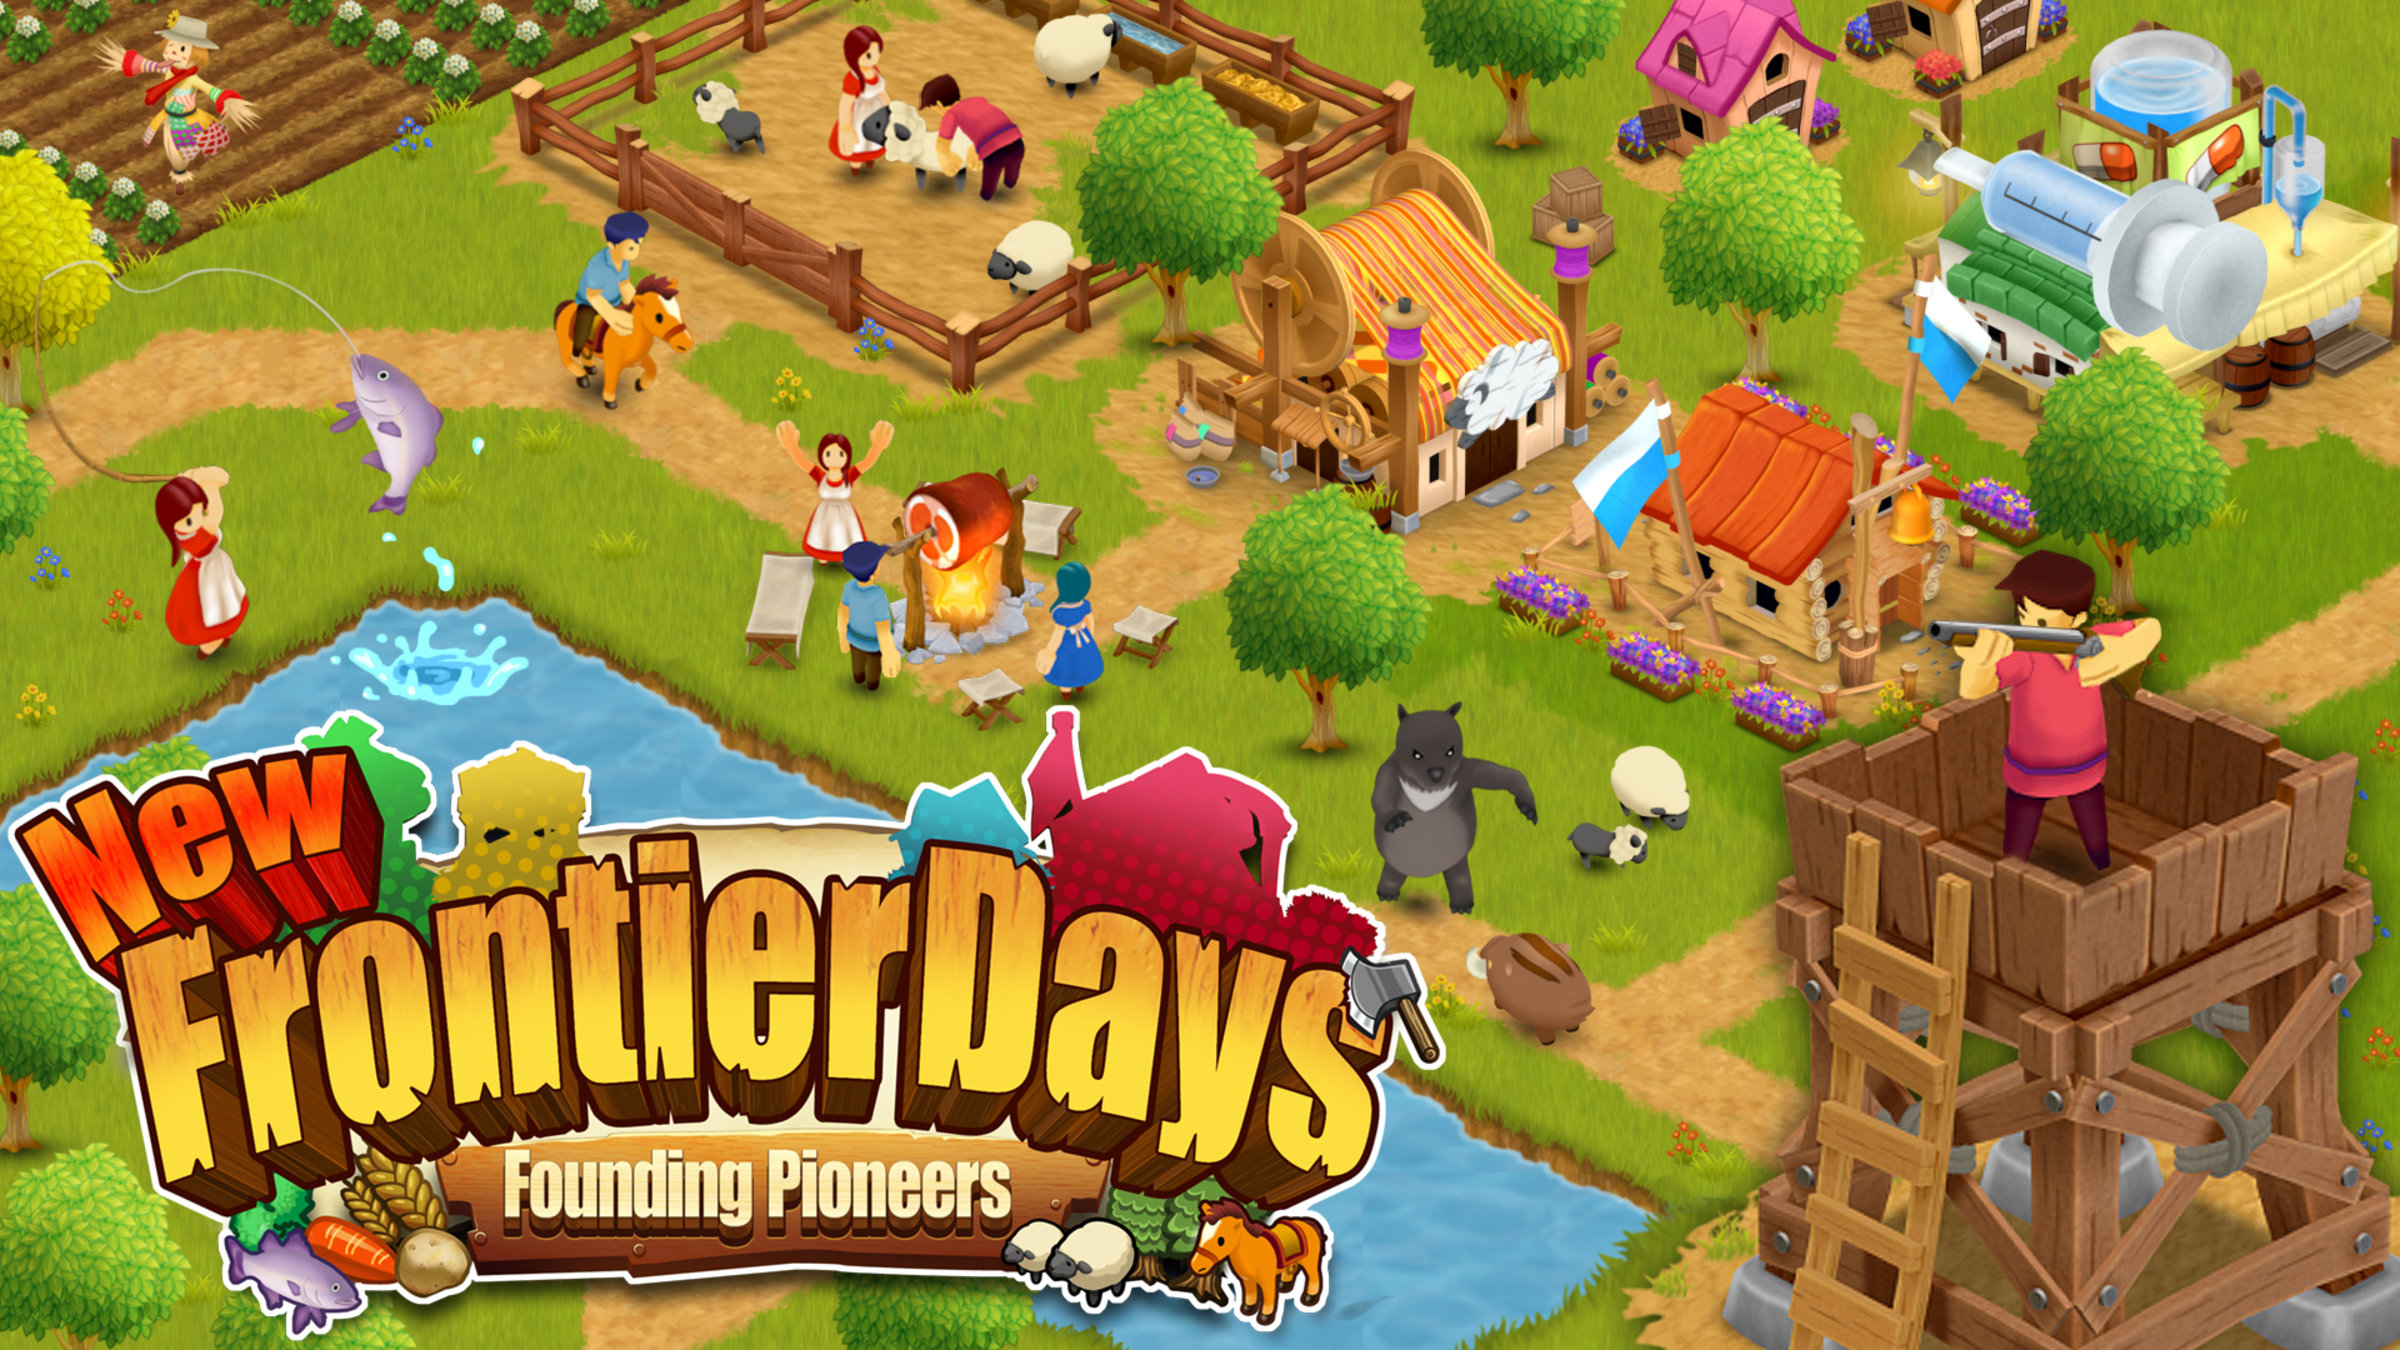 New Frontier Days Founding Pioneers pour Nintendo Switch Site